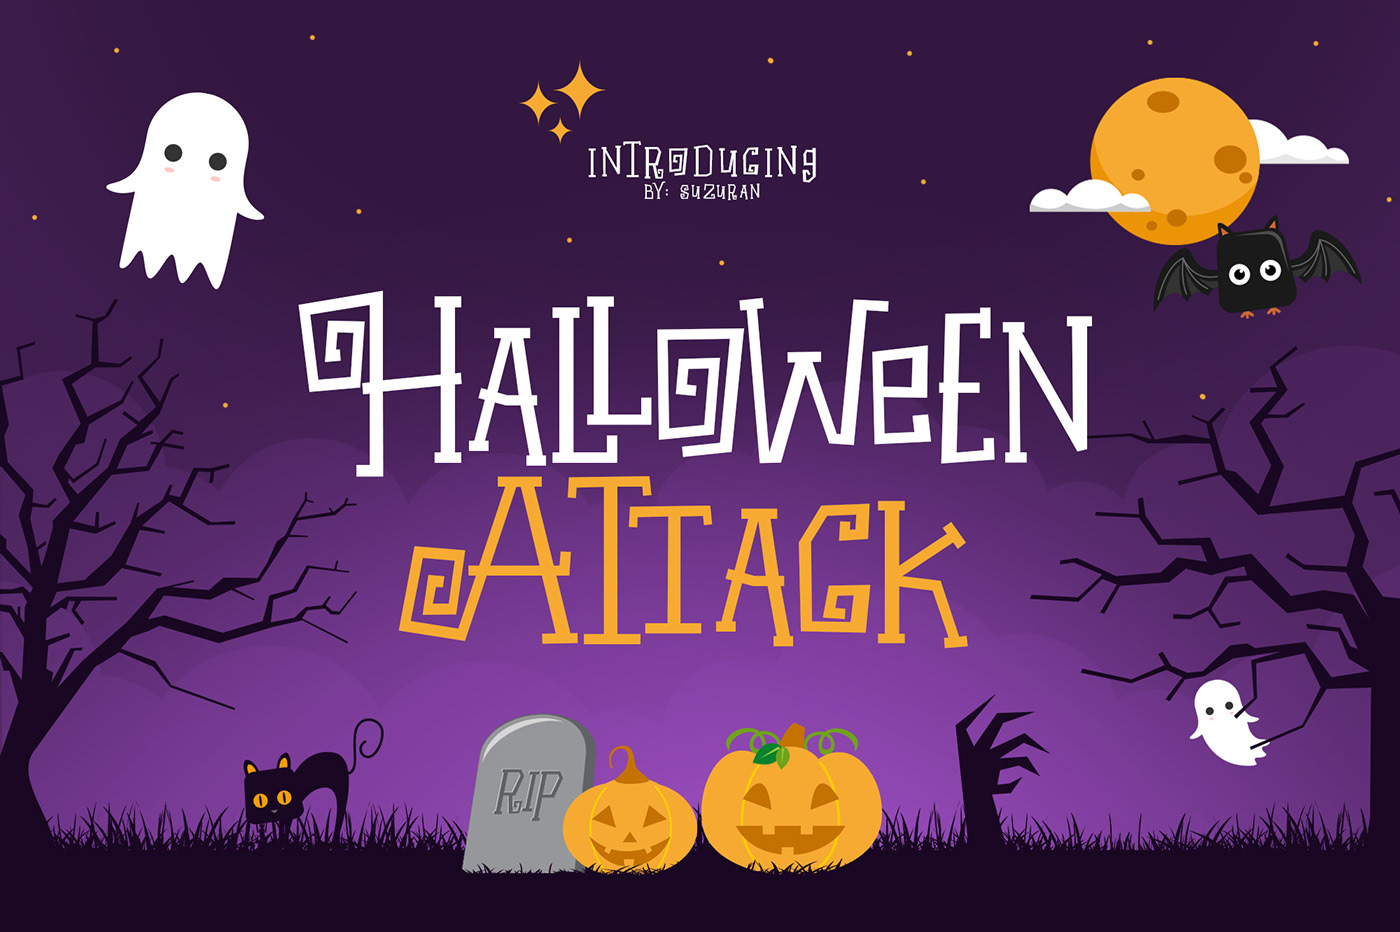 Example font Halloween Attack #2